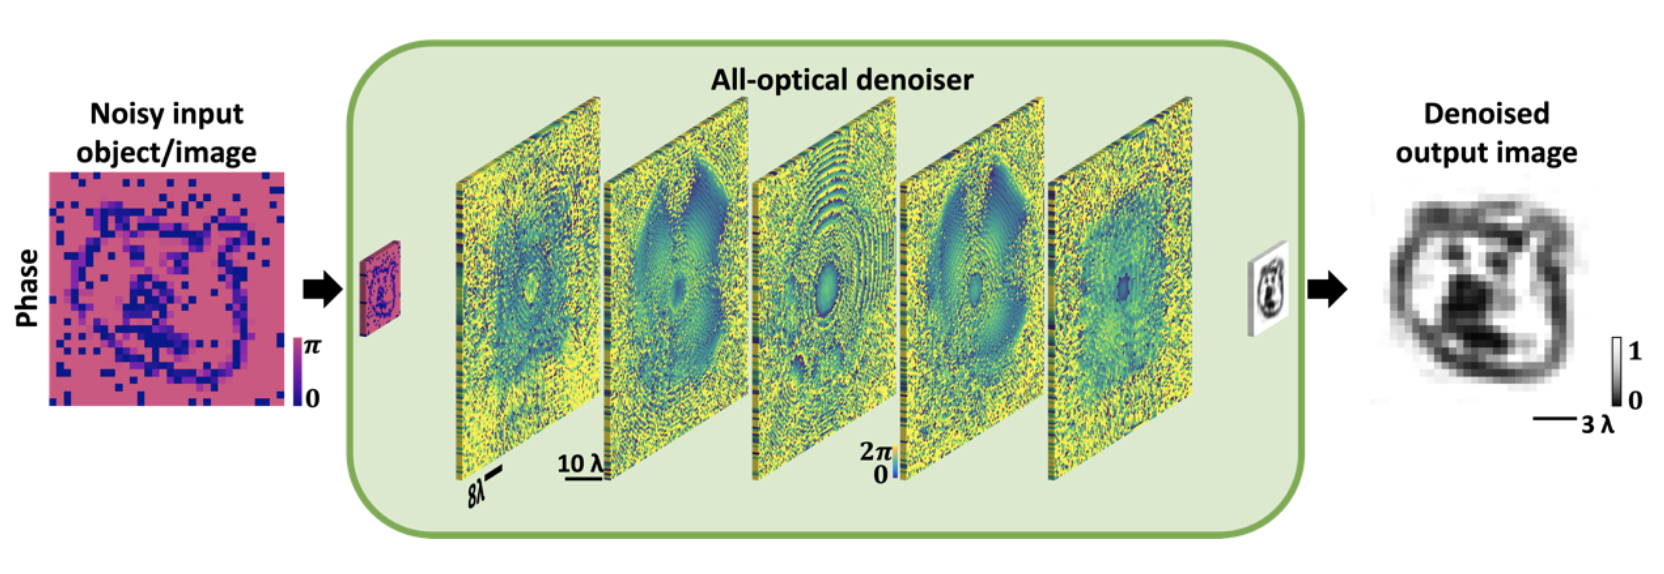 All-optical Image Denoising Using Diffractive Visual Processors. Image Credit: Ozcan Lab @ UCLA